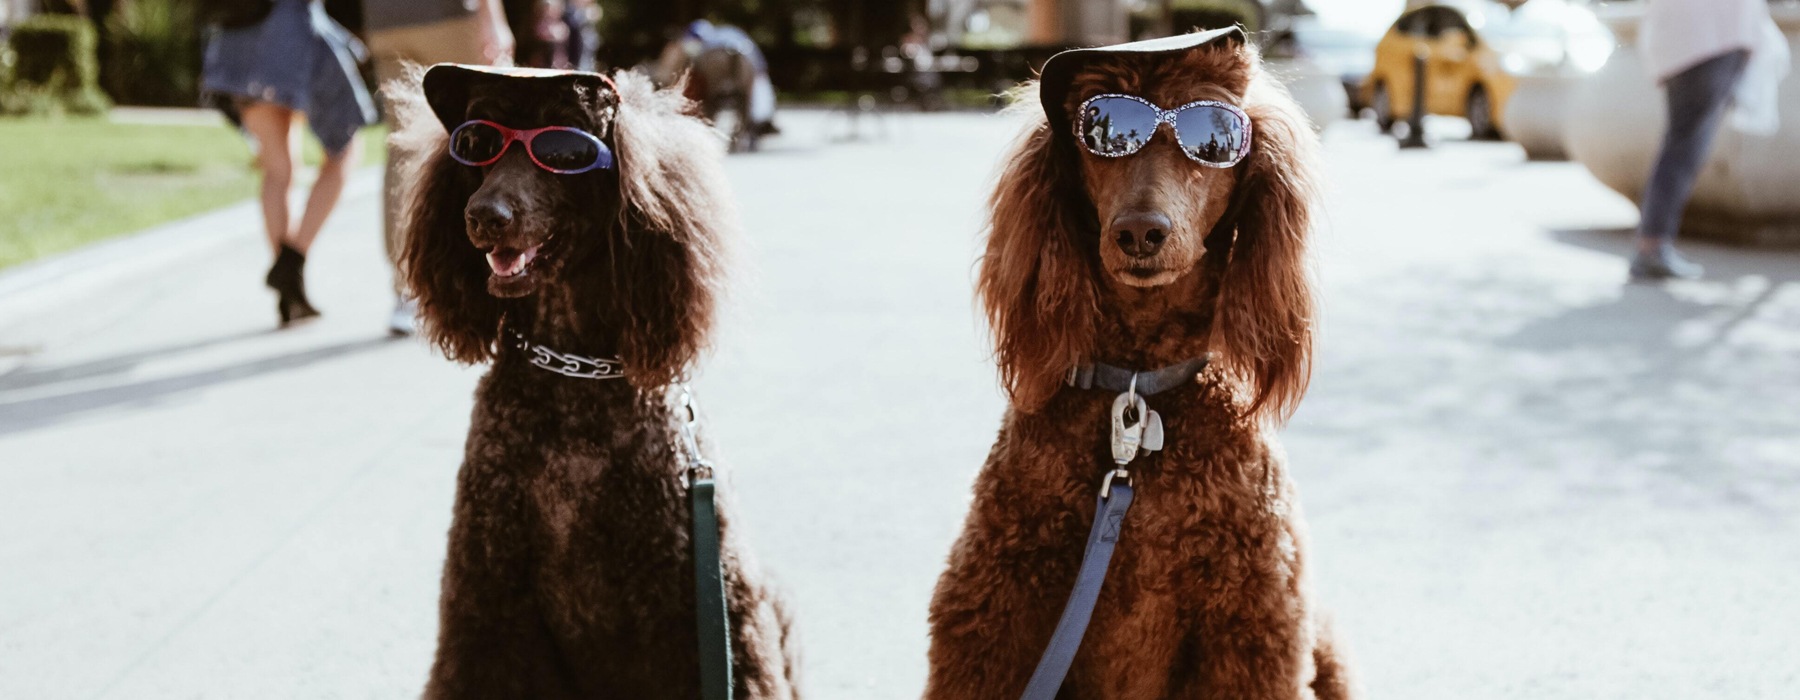 two large dogs in sunglasses